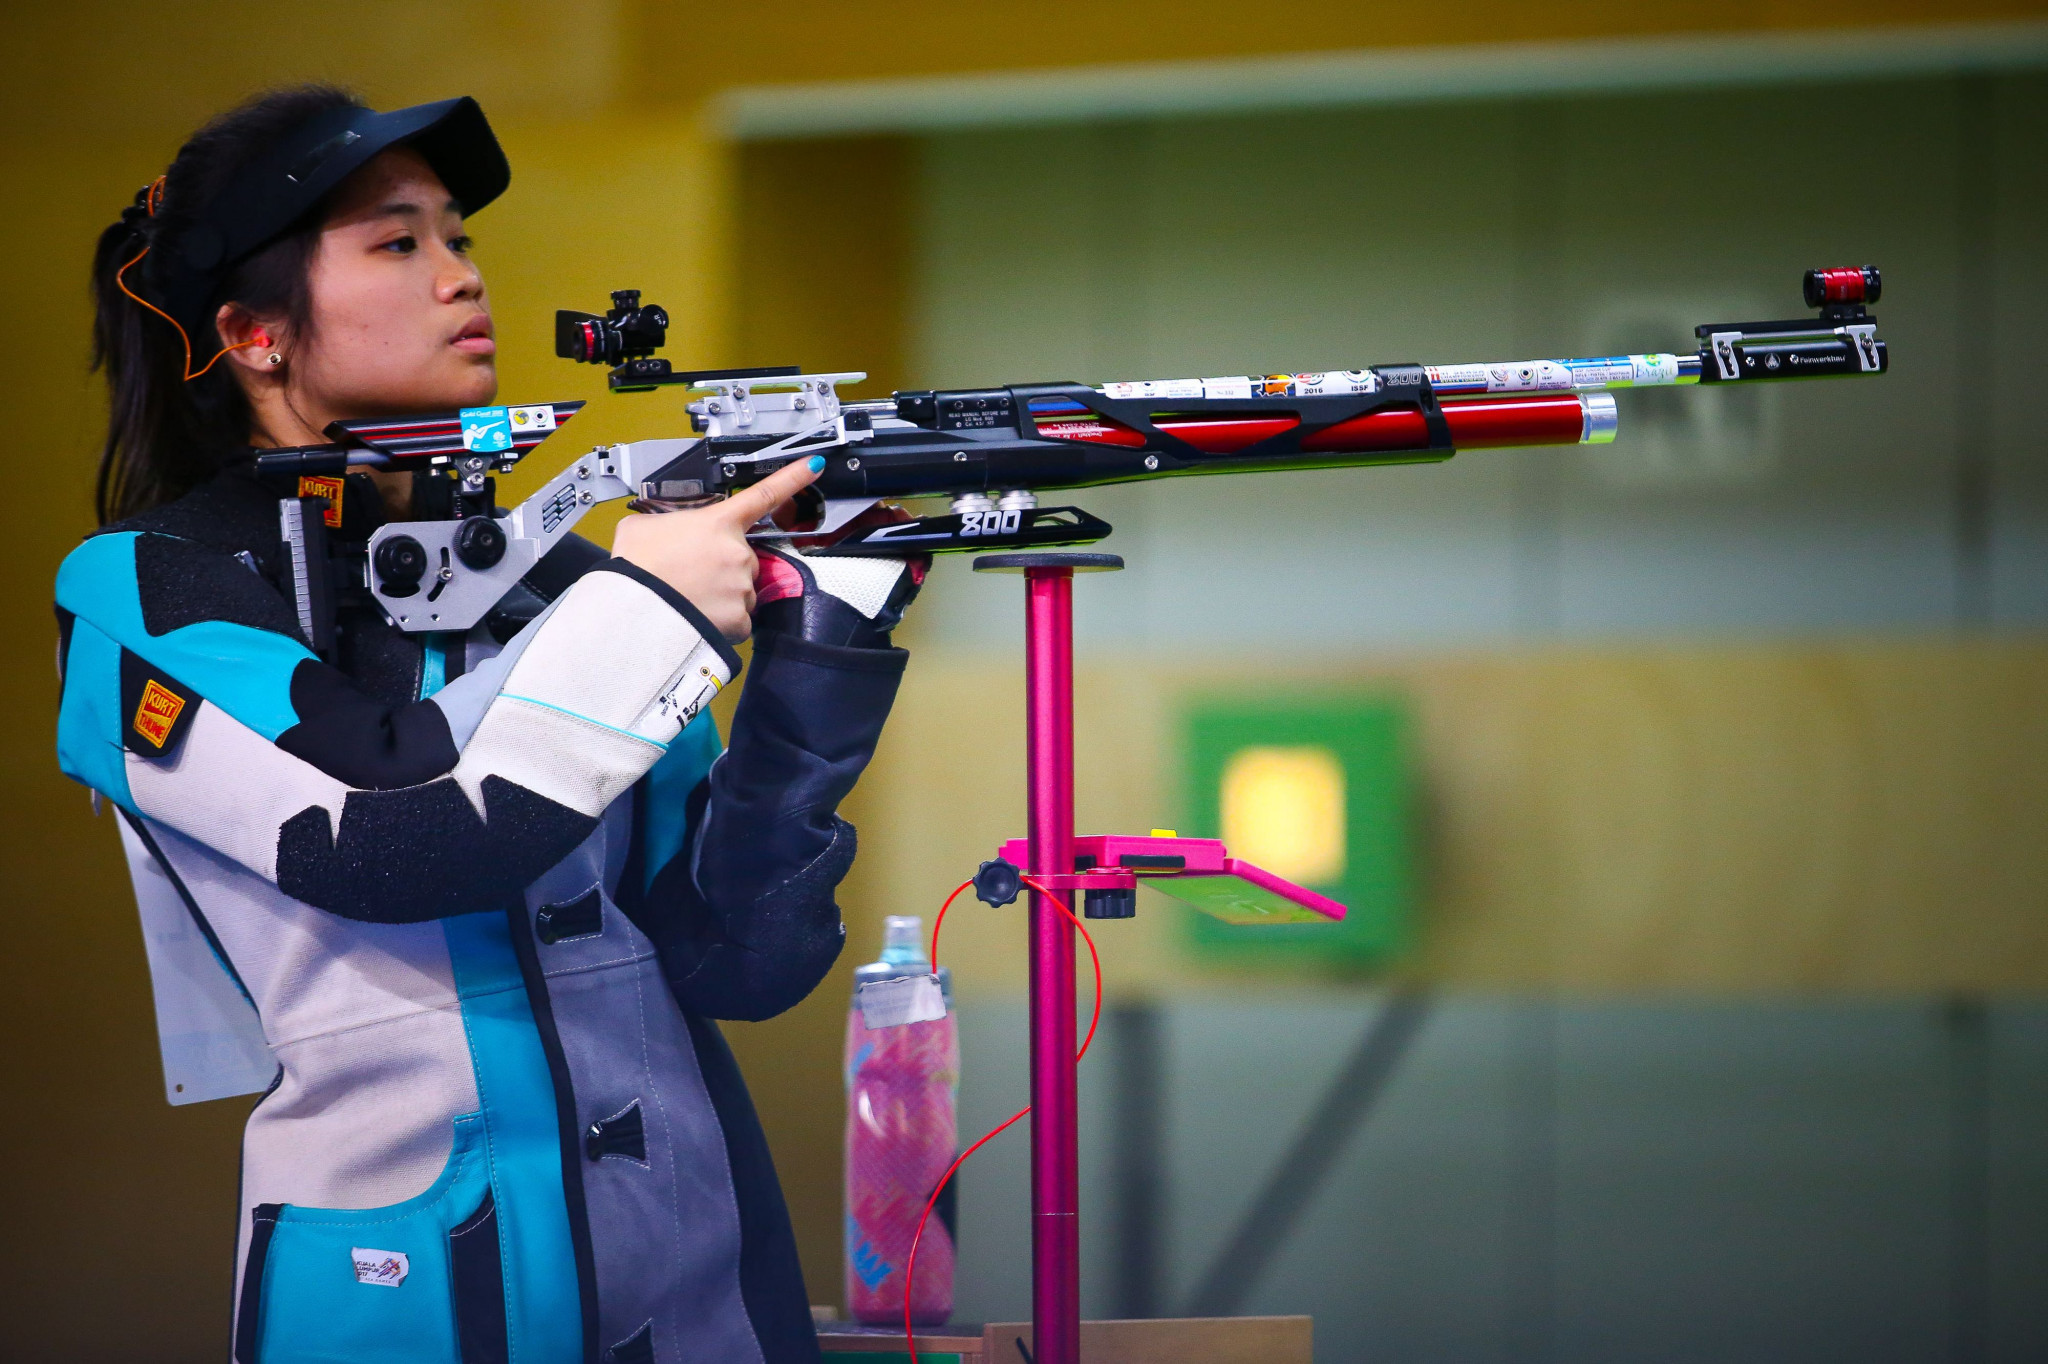 Martina Veloso earned Singapore’s first gold medal of Gold Coast 2018 by winning a dramatic shoot-off in the women’s 10m air rifle competition ©Getty Images